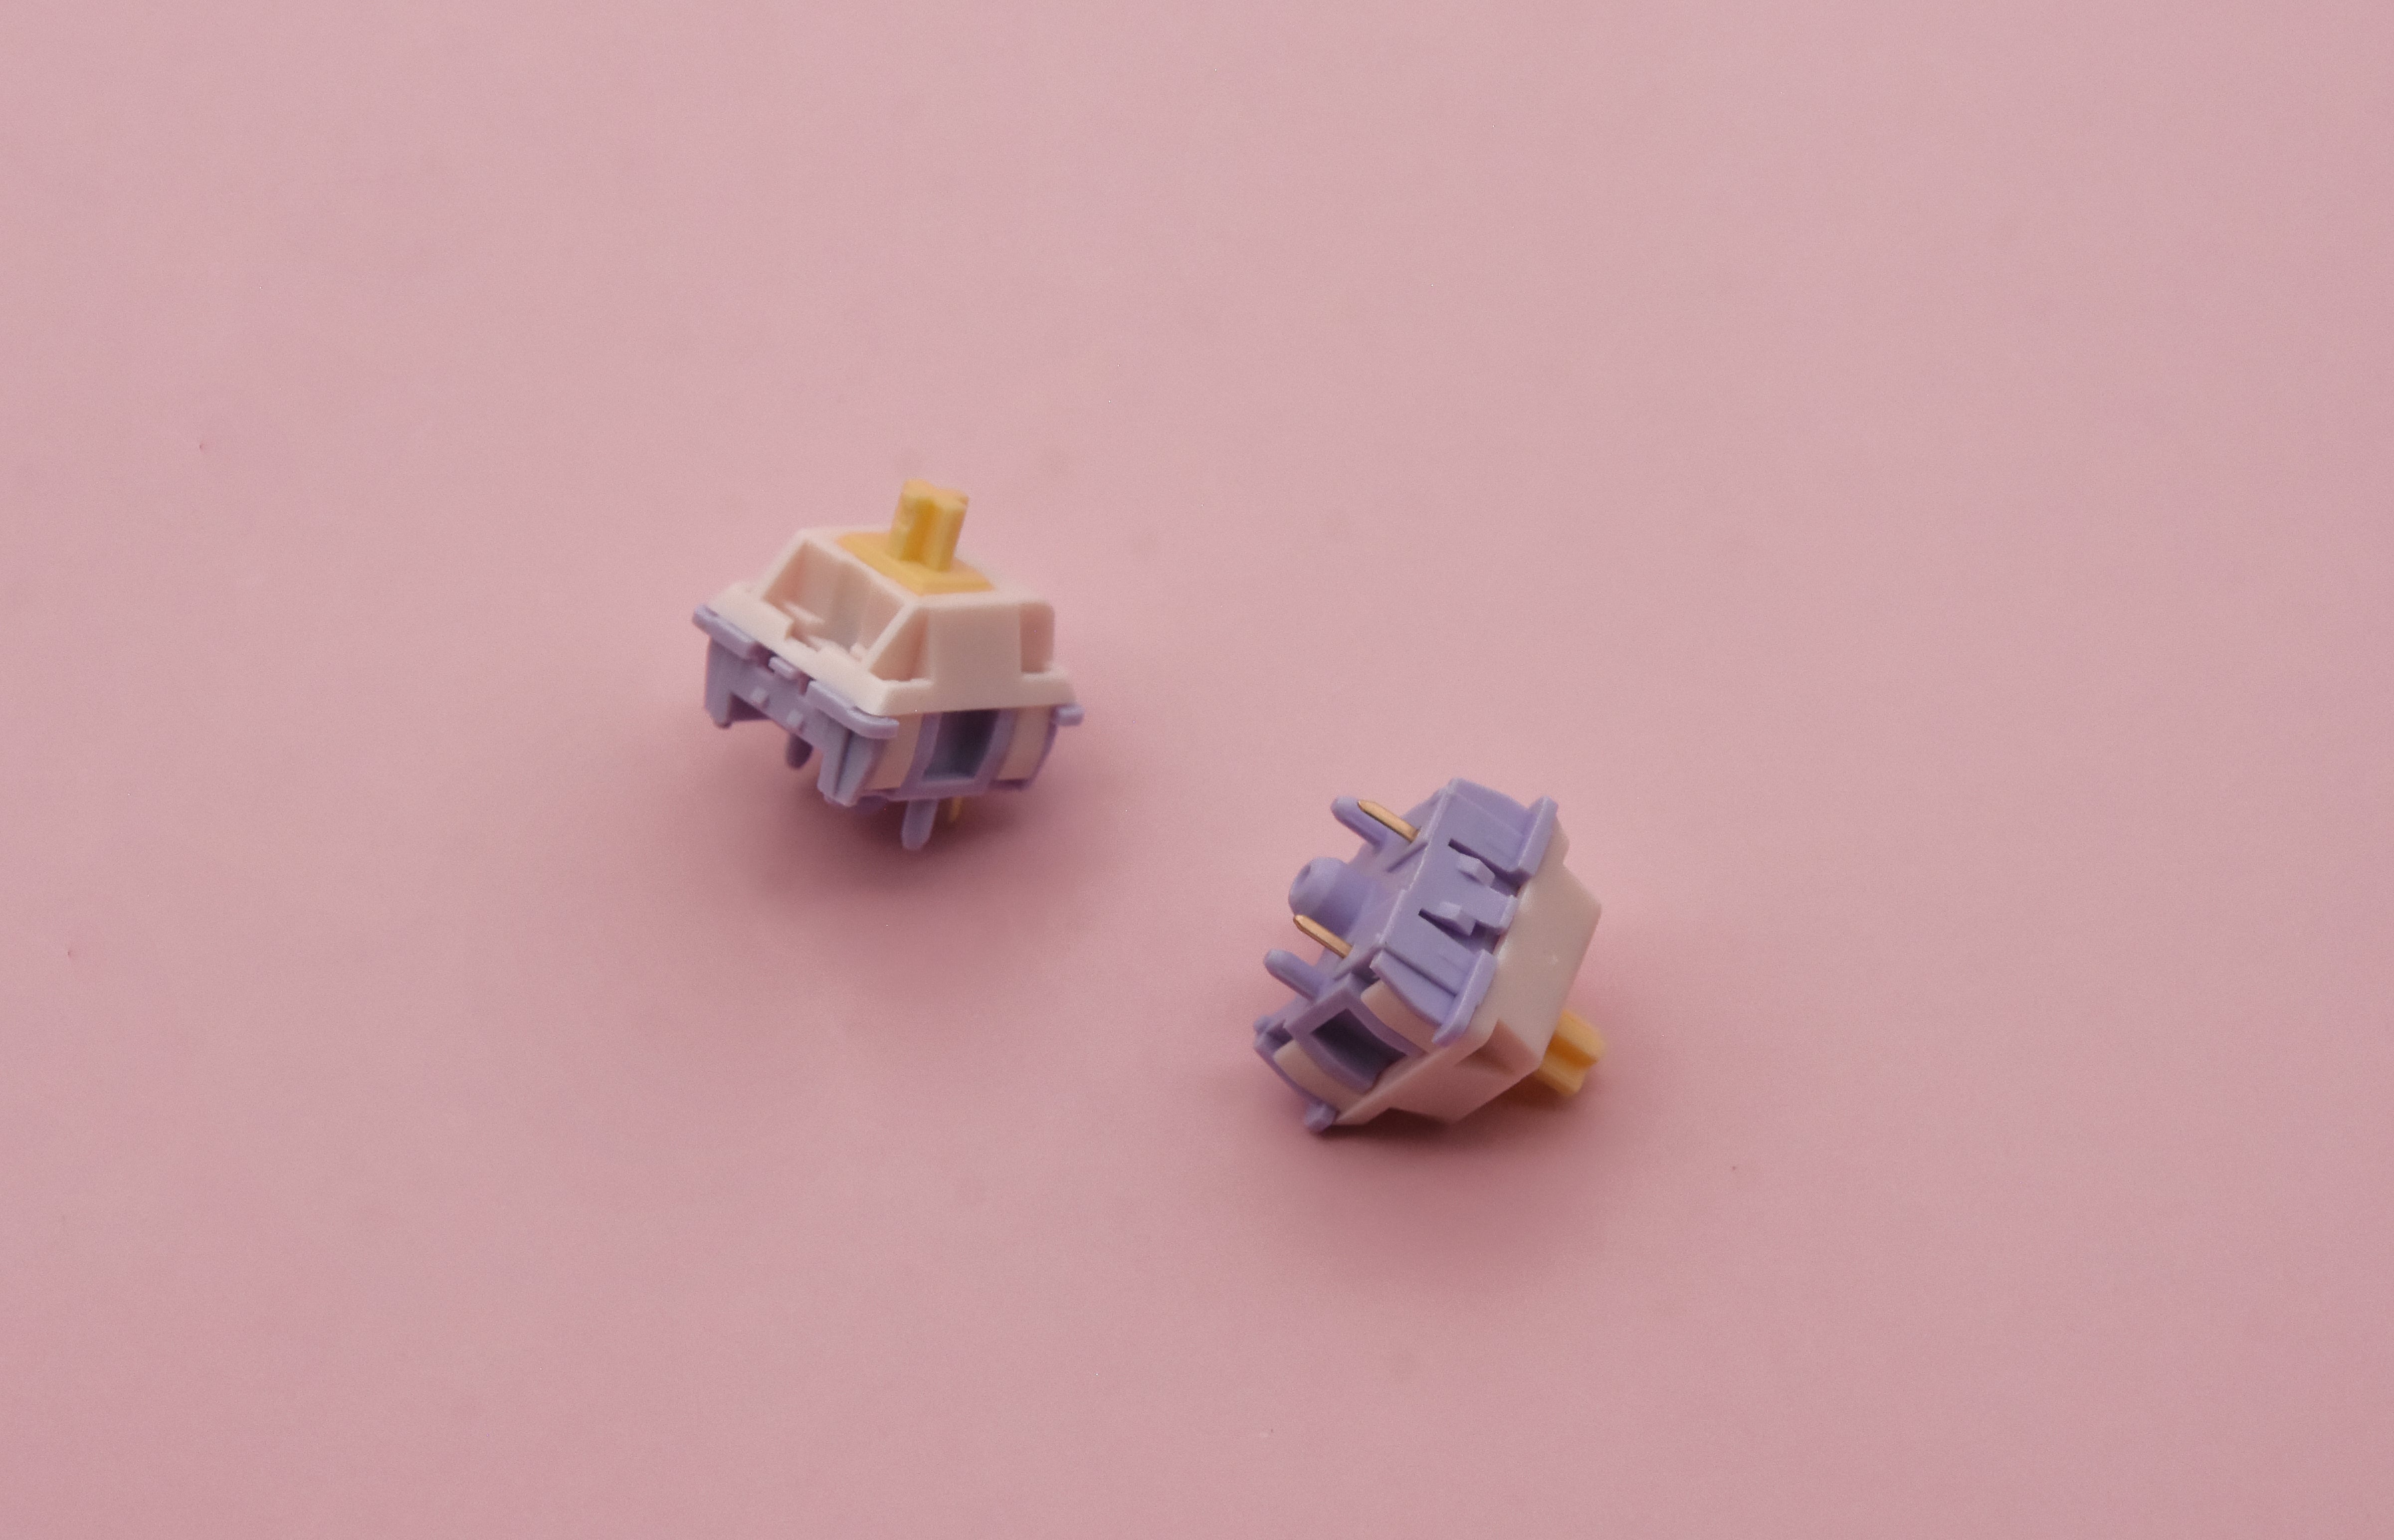 MMD PRINCESS TACTILE SWITCH FACTORY LUBED EDITION (10PCS)